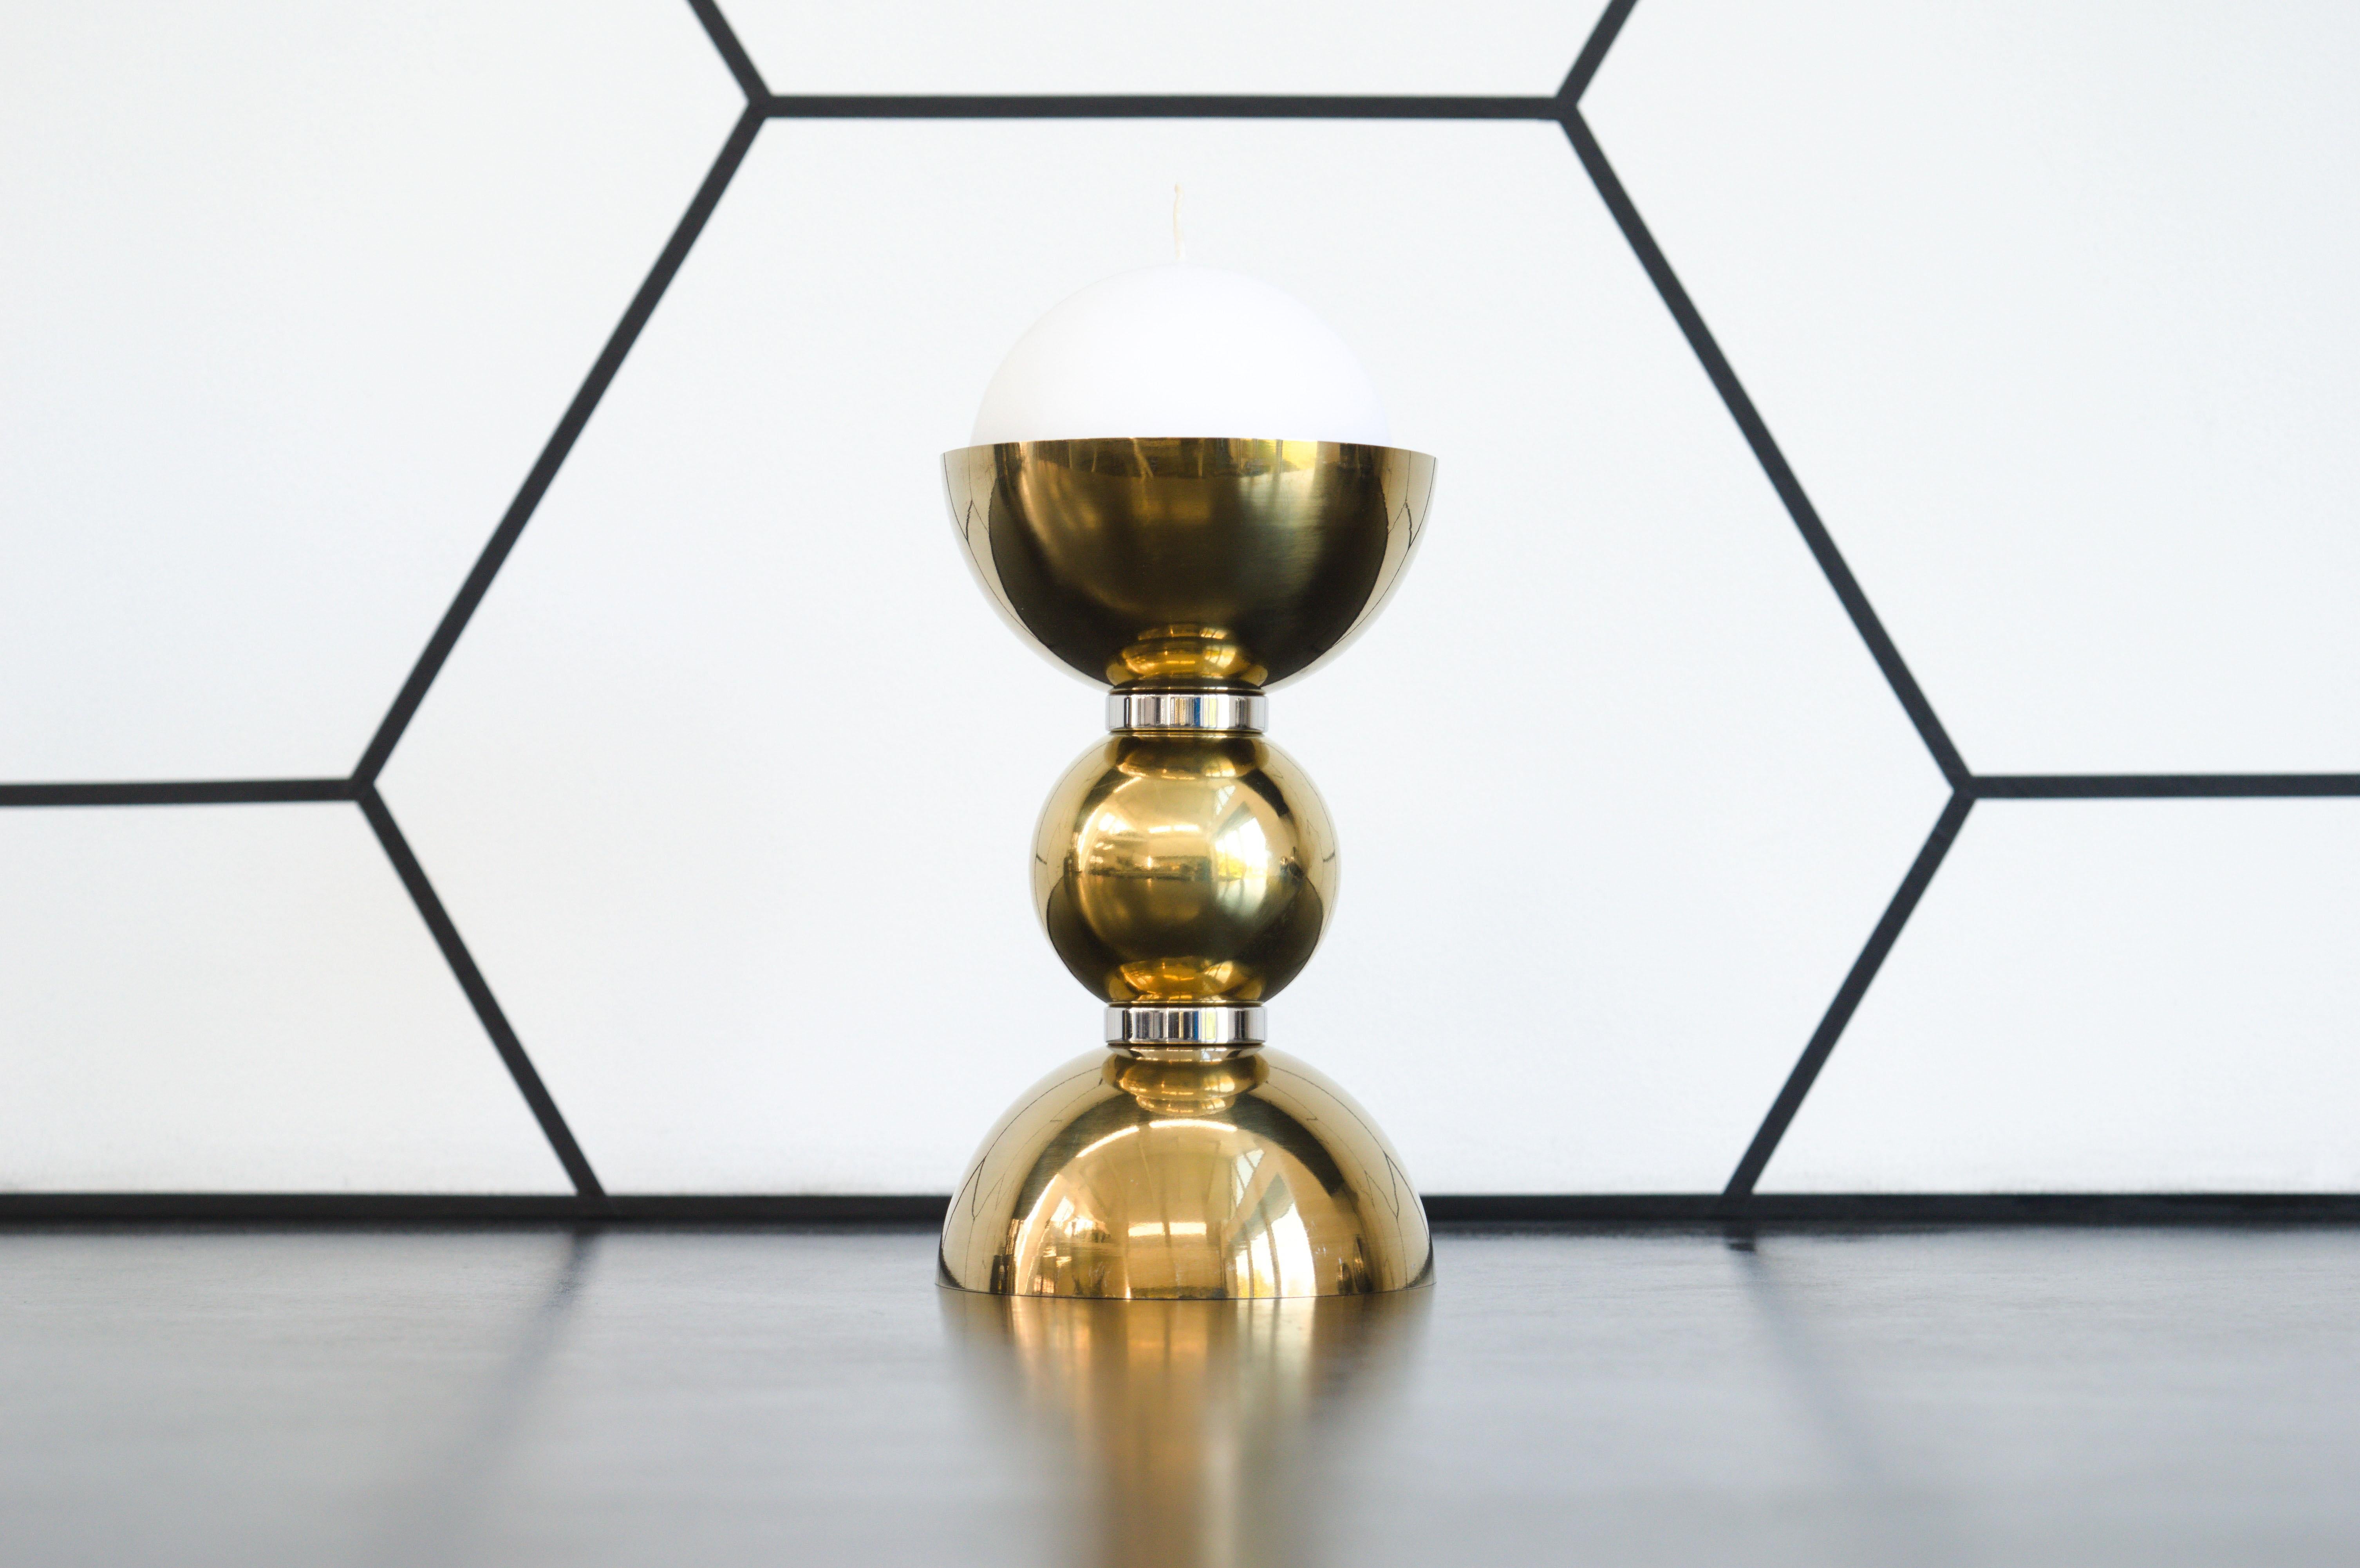 Contemporary candlestick created from polished stainless steel spheres and domes, sharing the form of the Apollo Table. The golden colour of the candlestick mimics the thermal insulation blankets on the Apollo Lunar Module, used during the missions